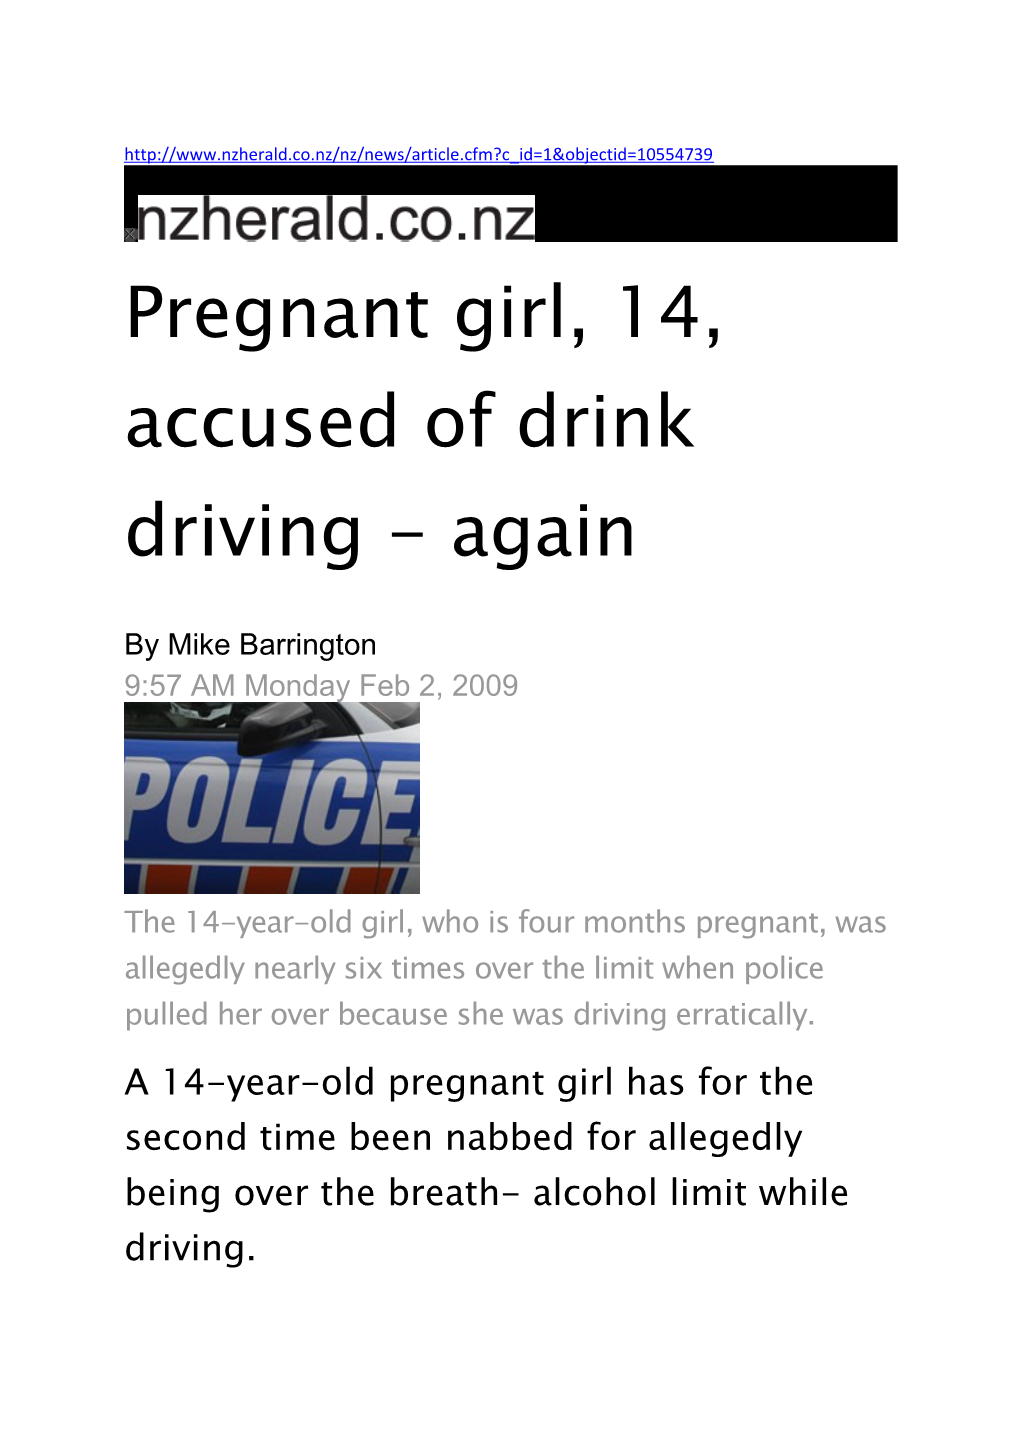 Pregnant Girl, 14, Accused of Drink Driving - Again s1